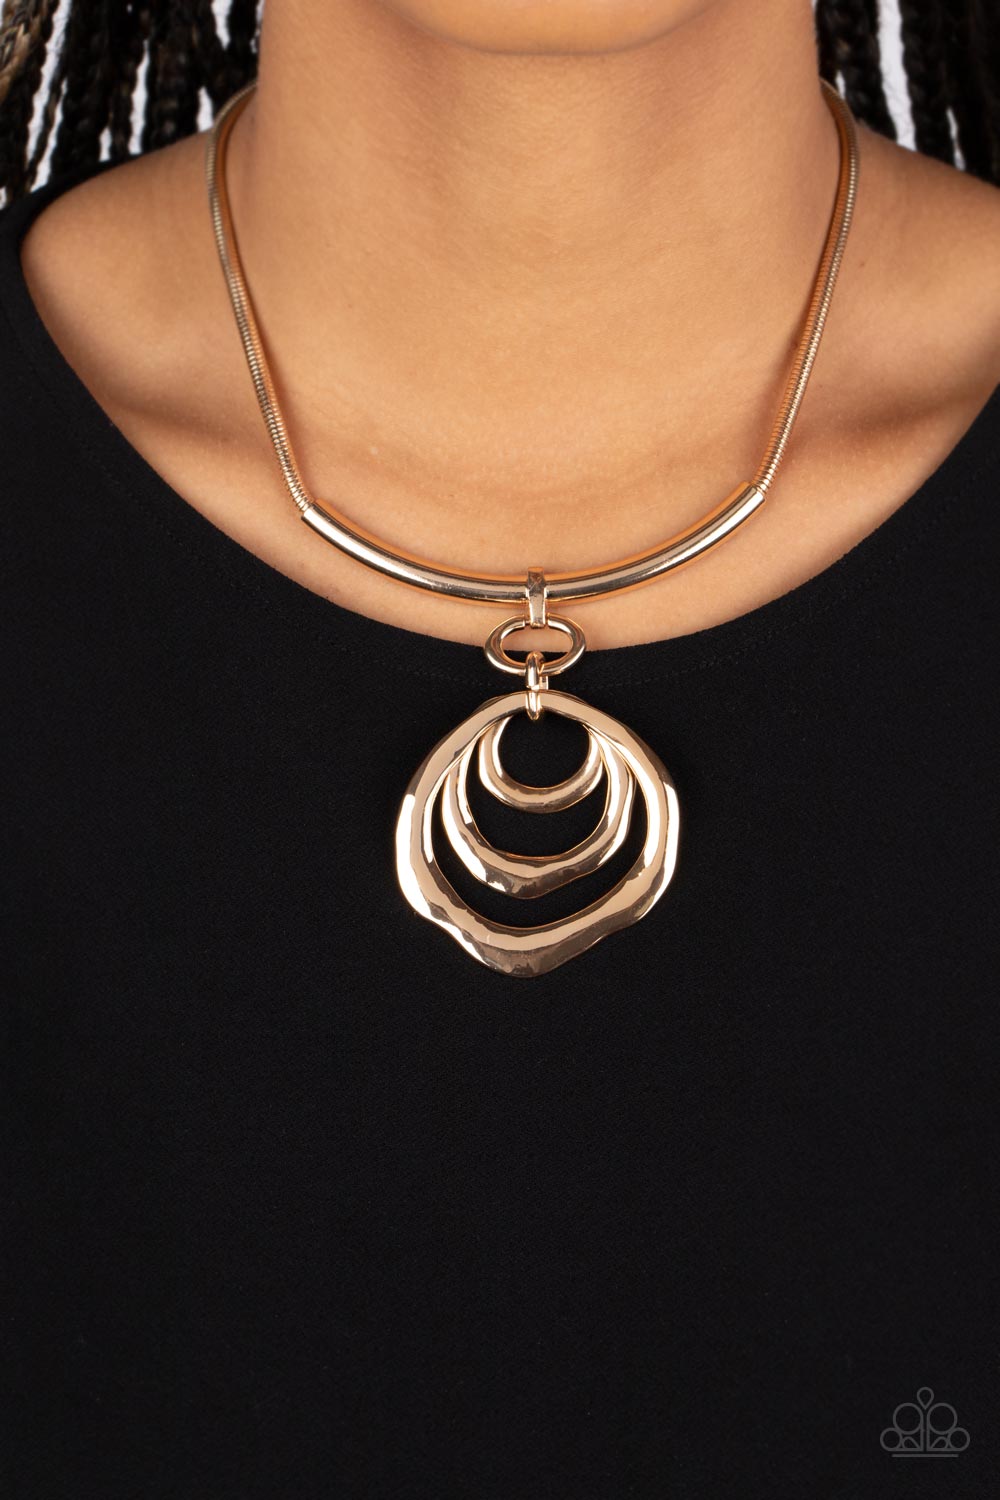 Forged in Fabulous - Gold Necklace - Paparazzi Accessories - Warped gold hoops glisten from the bottom of a bowing gold bar set in the center of a rounded gold snake chain, resulting in a contemporary centerpiece below the collar. Features an adjustable clasp closure.